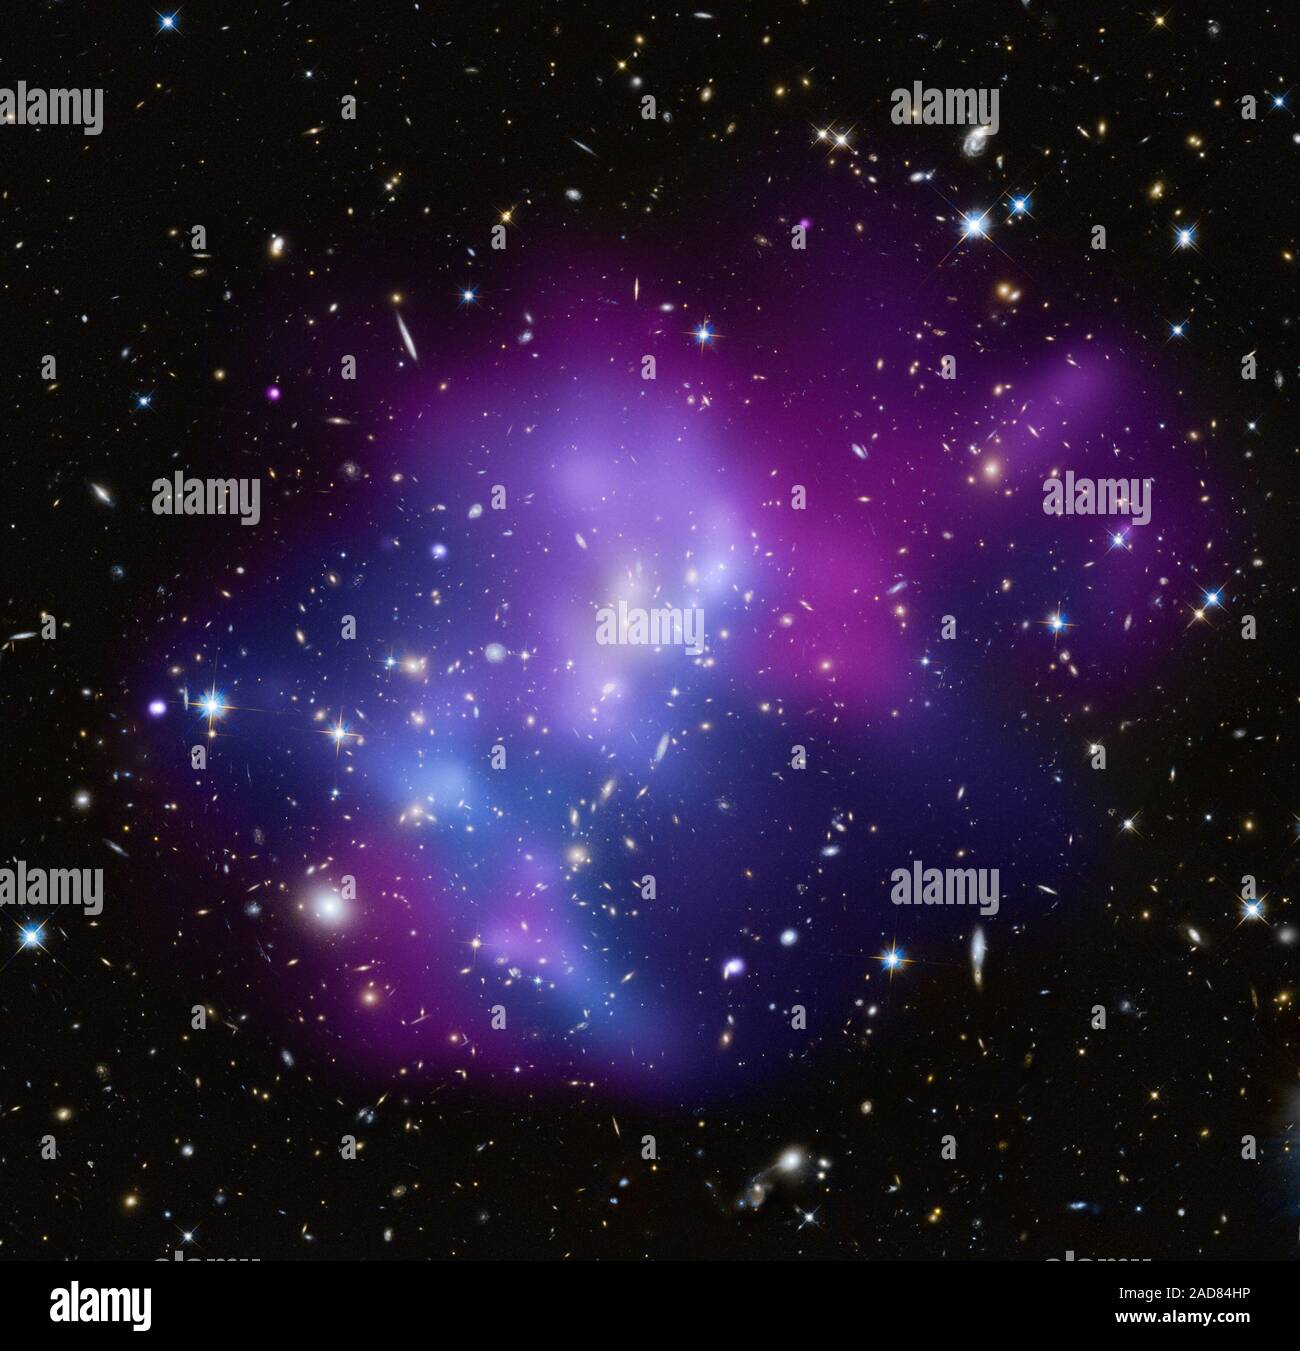 This composite image shows the massive galaxy cluster MACS J0717.5+3745 (MACS J0717, for short), where four separate galaxy clusters have been involved in a collision -- the first time such a phenomenon has been documented. Hot gas is shown in an image from NASA's Chandra X-ray Observatory, and galaxies are shown in an optical image from NASA's Hubble Space Telescope. The hot gas is color-coded to show temperature, where the coolest gas is reddish purple, the hottest gas is blue, and the temperatures in between are purple.   The repeated collisions in MACS J0717 are caused by a 13-million-ligh Stock Photo